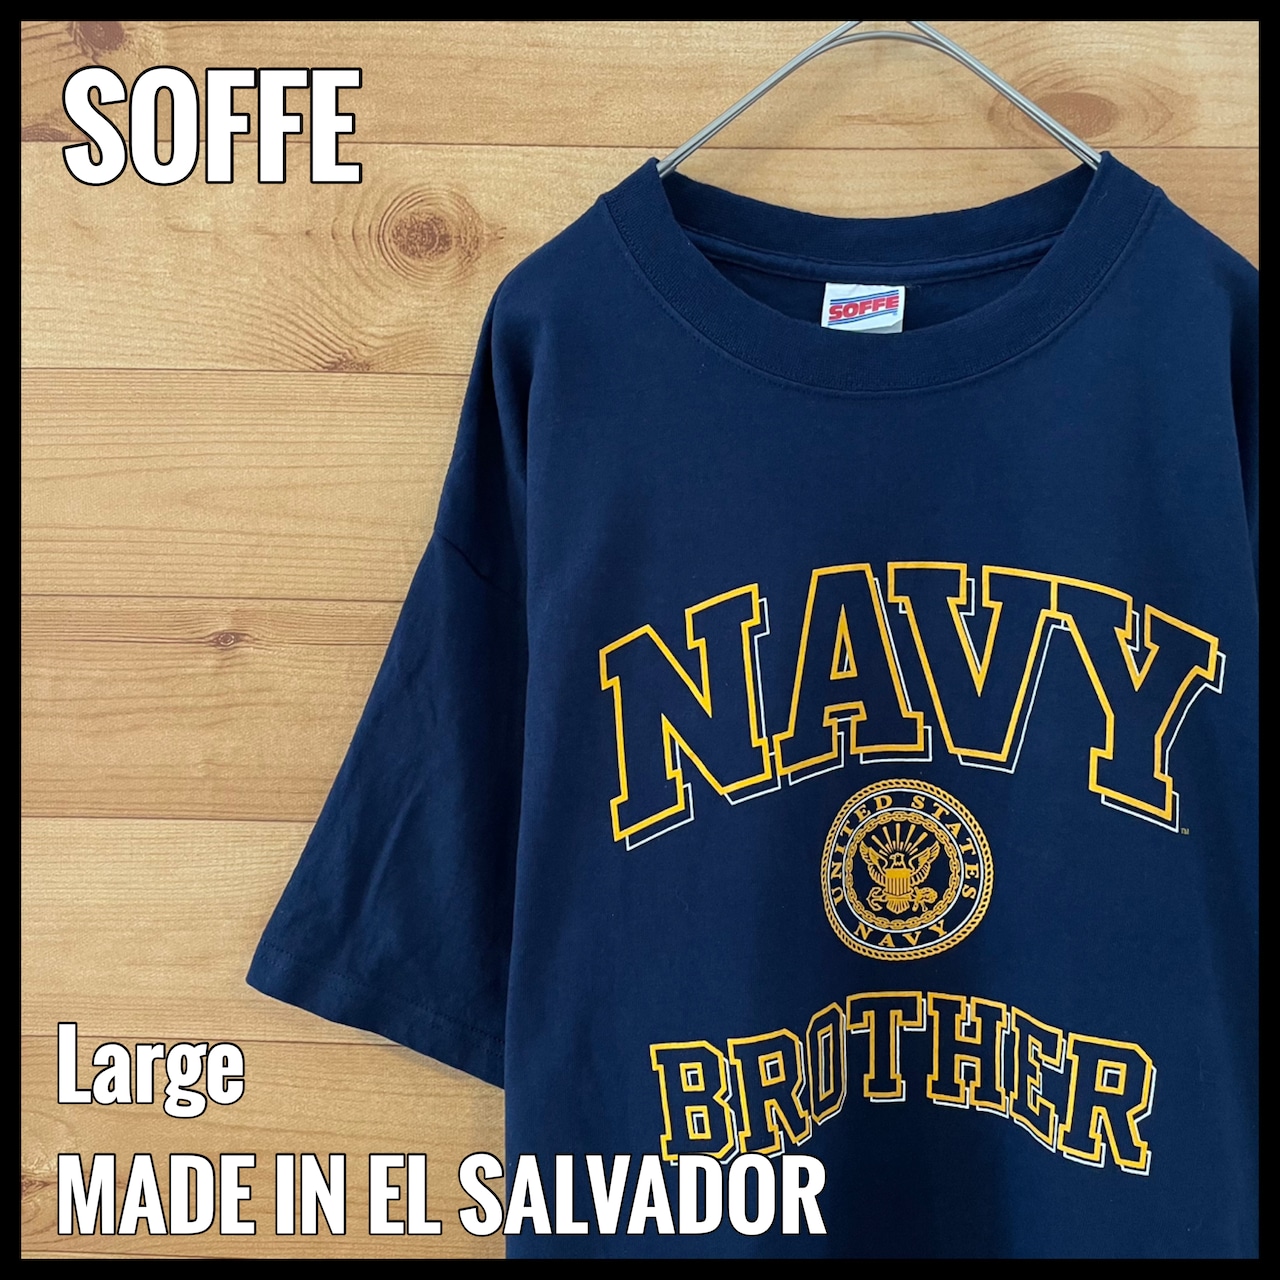 【SOFFE】NAVY BROTHER アーチロゴ プリント Tシャツ L US古着